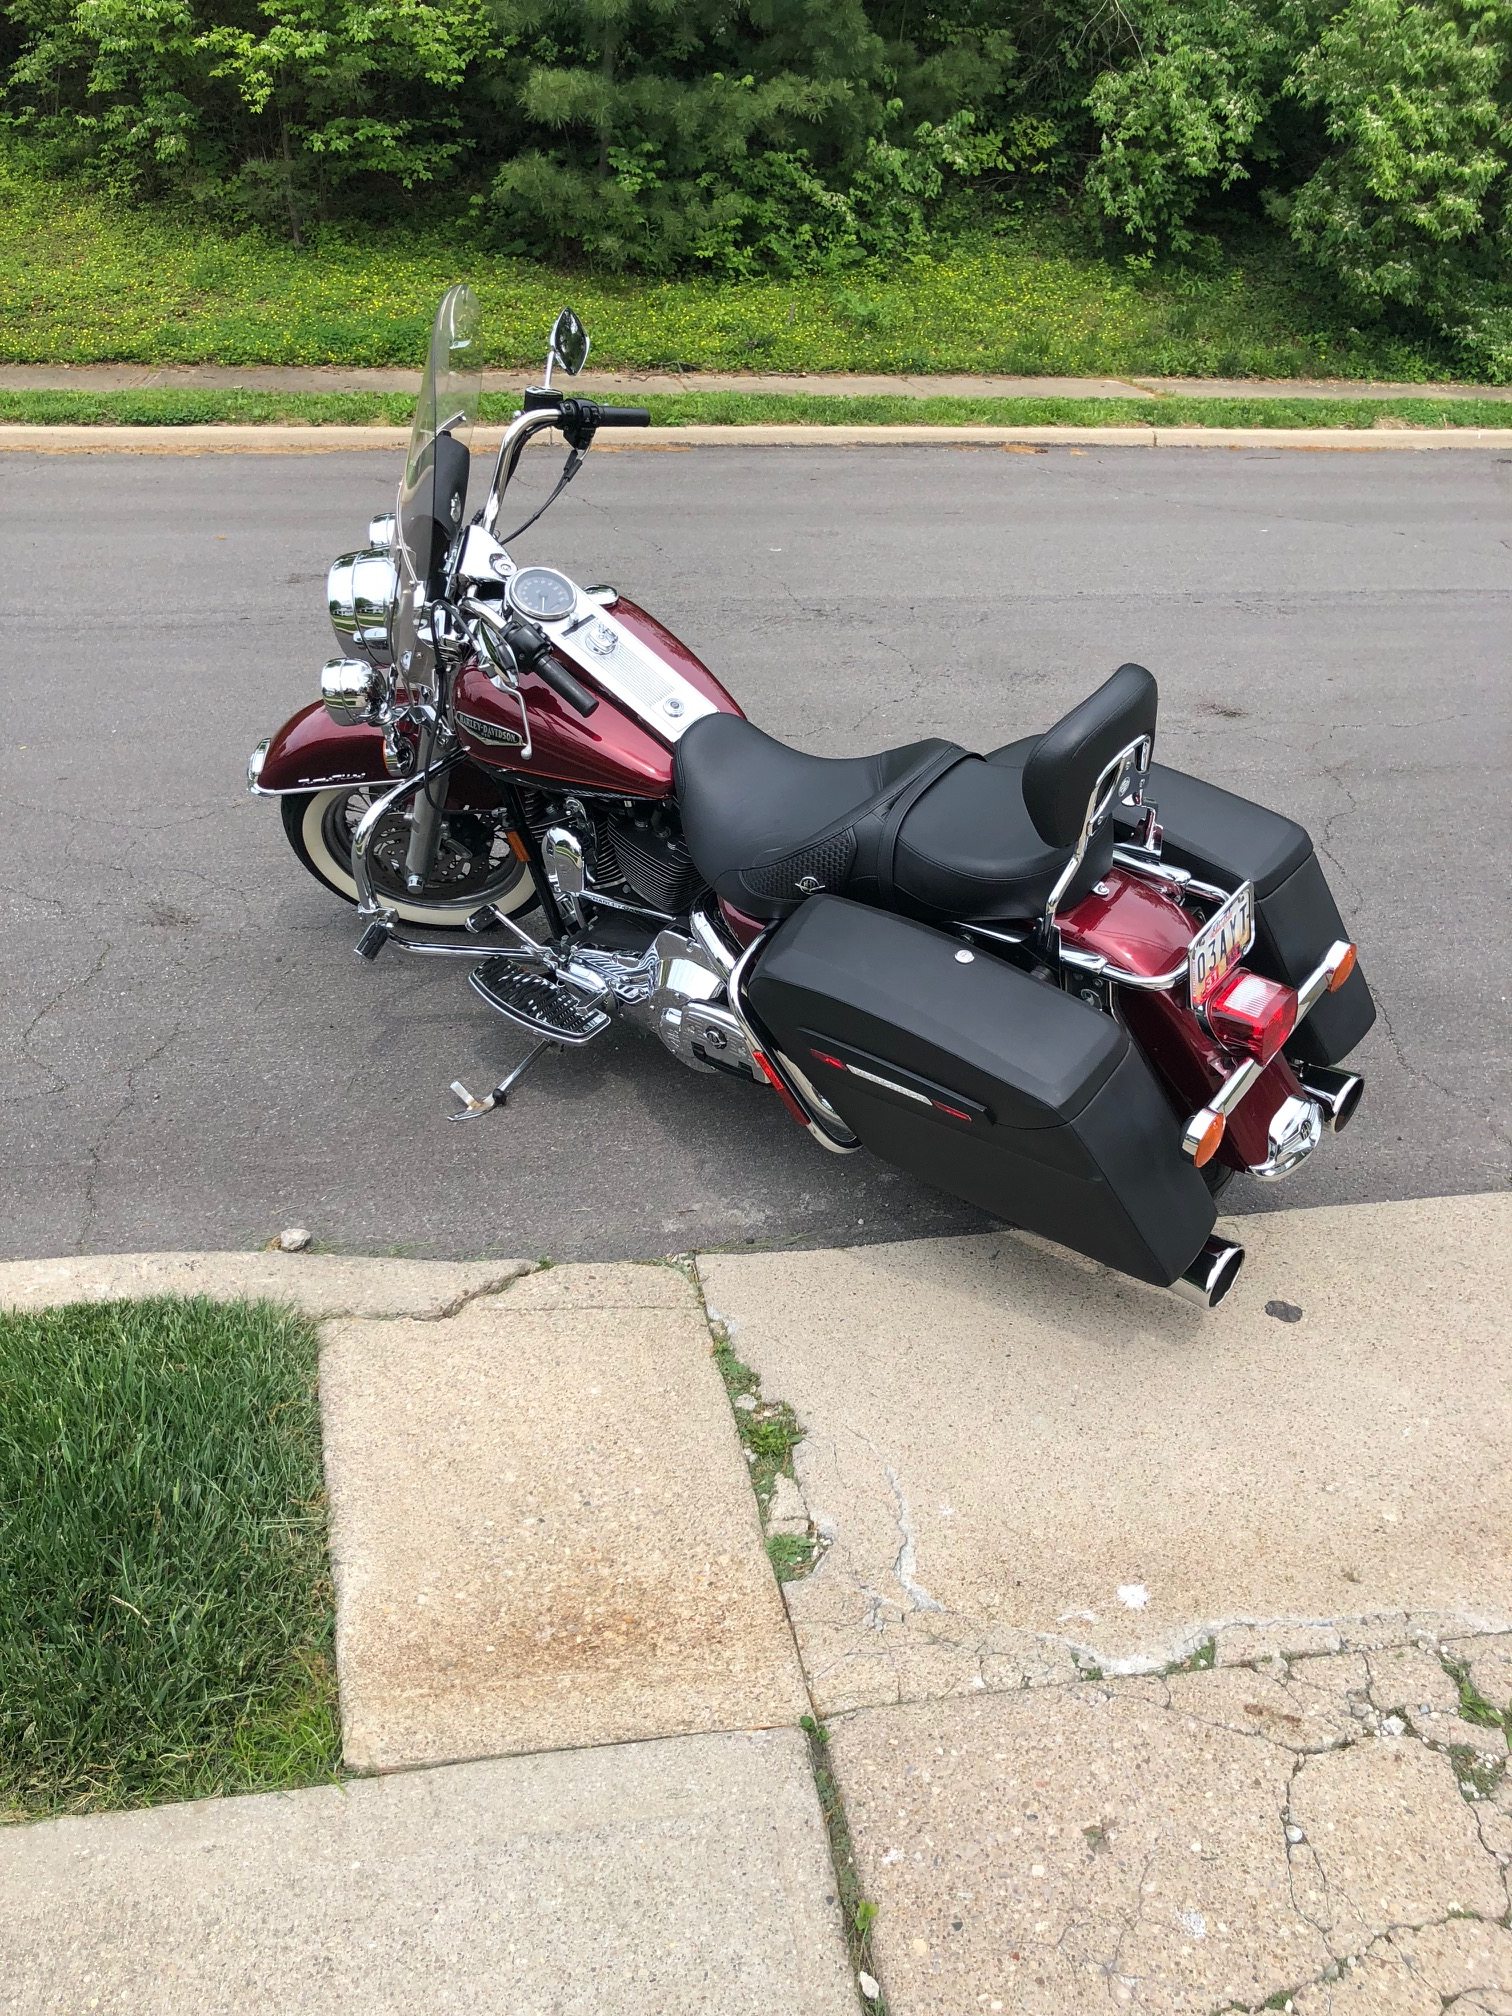 What are The Benefits of Detachable Windshield and Saddlebags in Road King